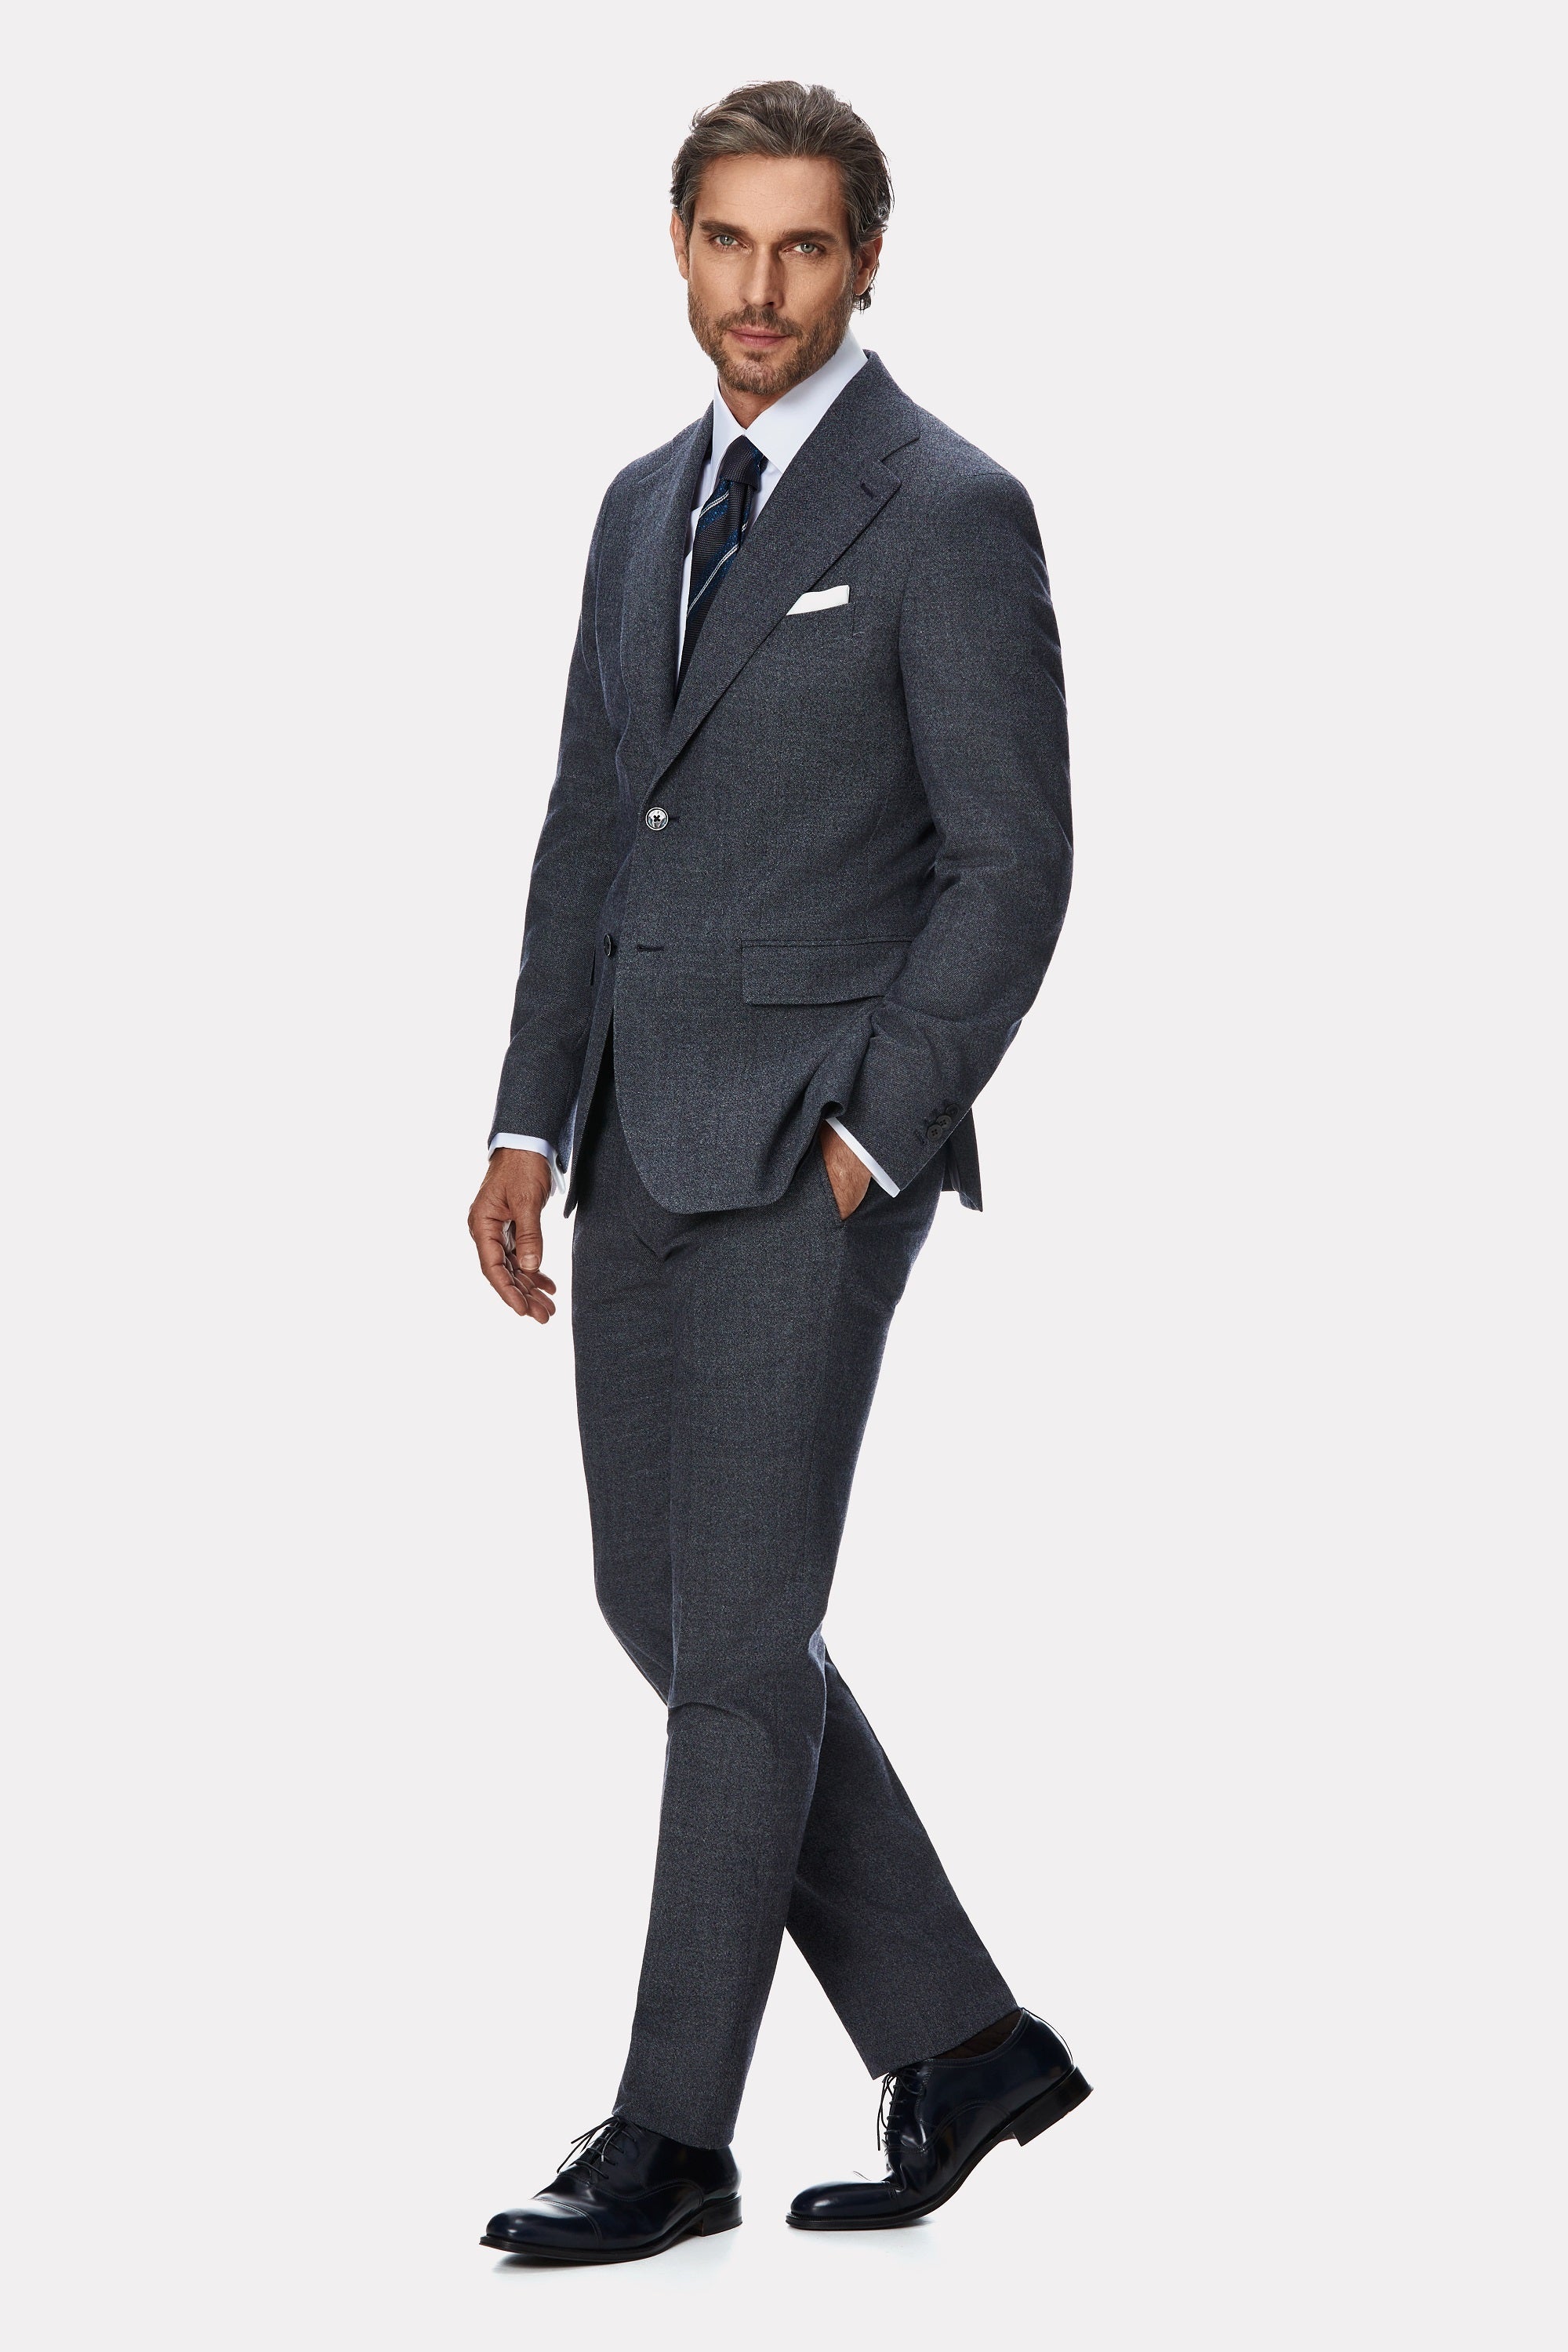 Two-piece gray flannel suit, textured